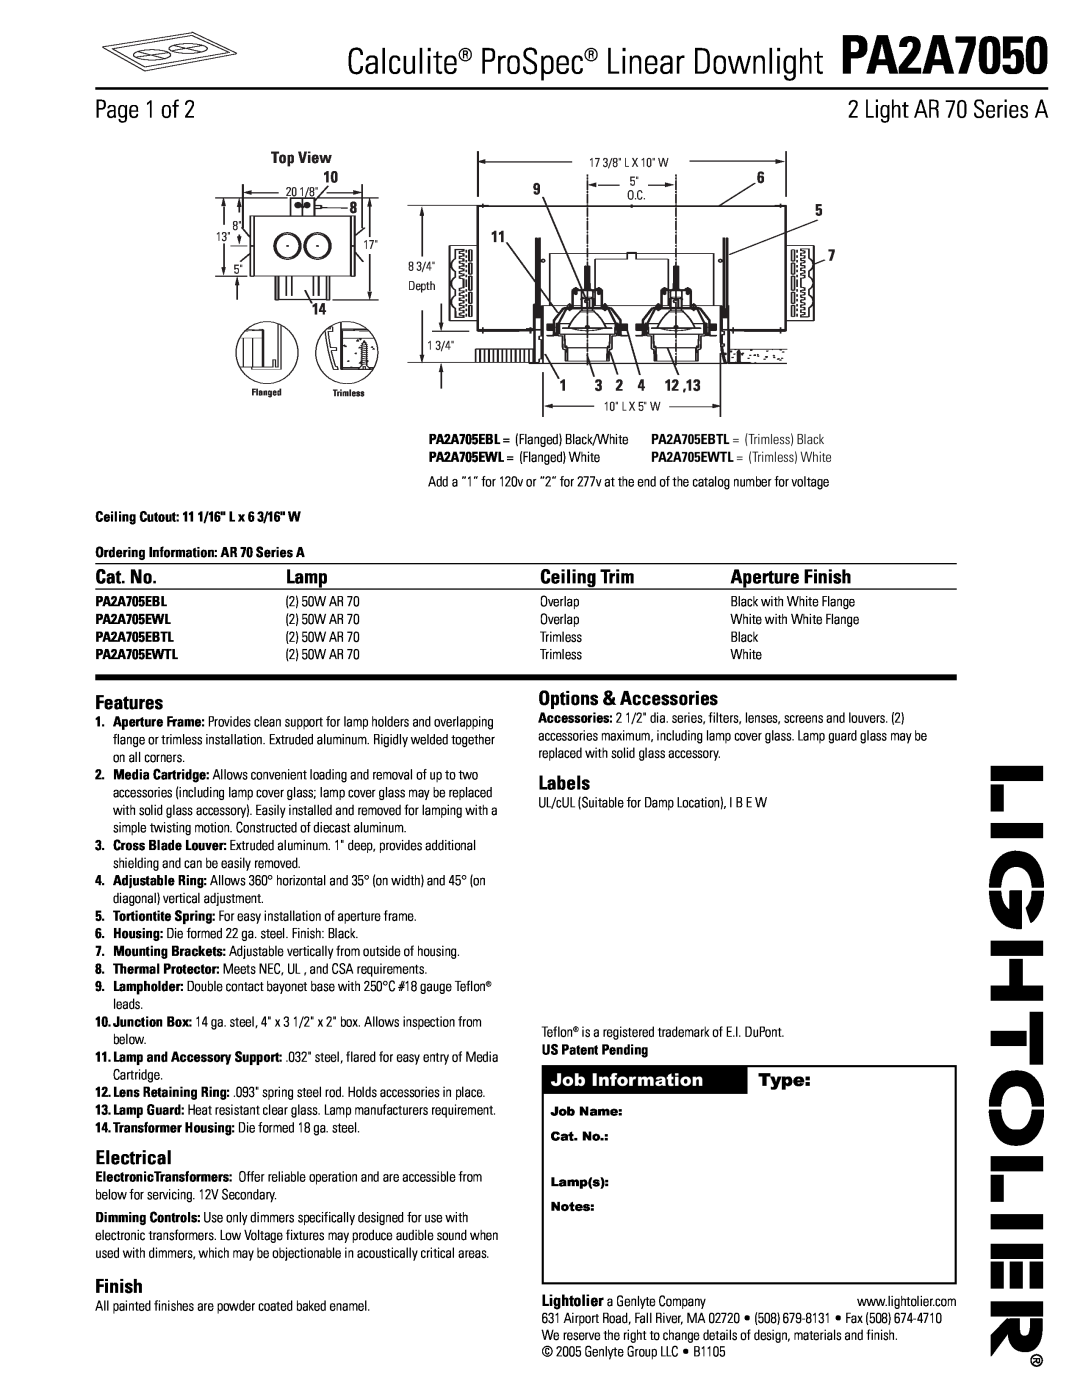 Lightolier manual Calculite ProSpec Linear Downlight PA2A7050, Page 1 of, Light AR 70 Series A, Type, Job Information 